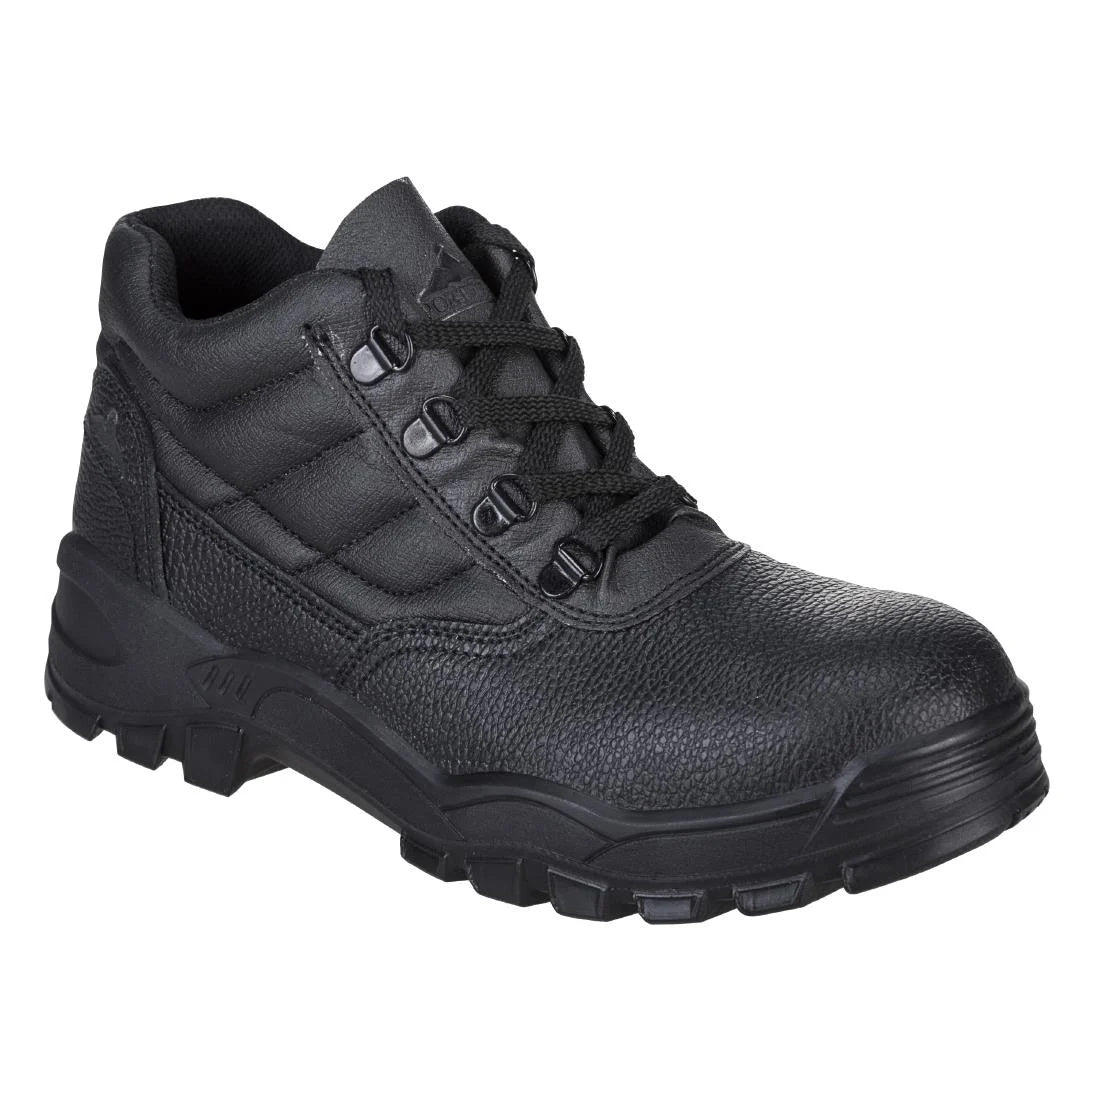 BA059-41 Portwest Protector Boot S1P Black Size 41 JD Catering Equipment Solutions Ltd